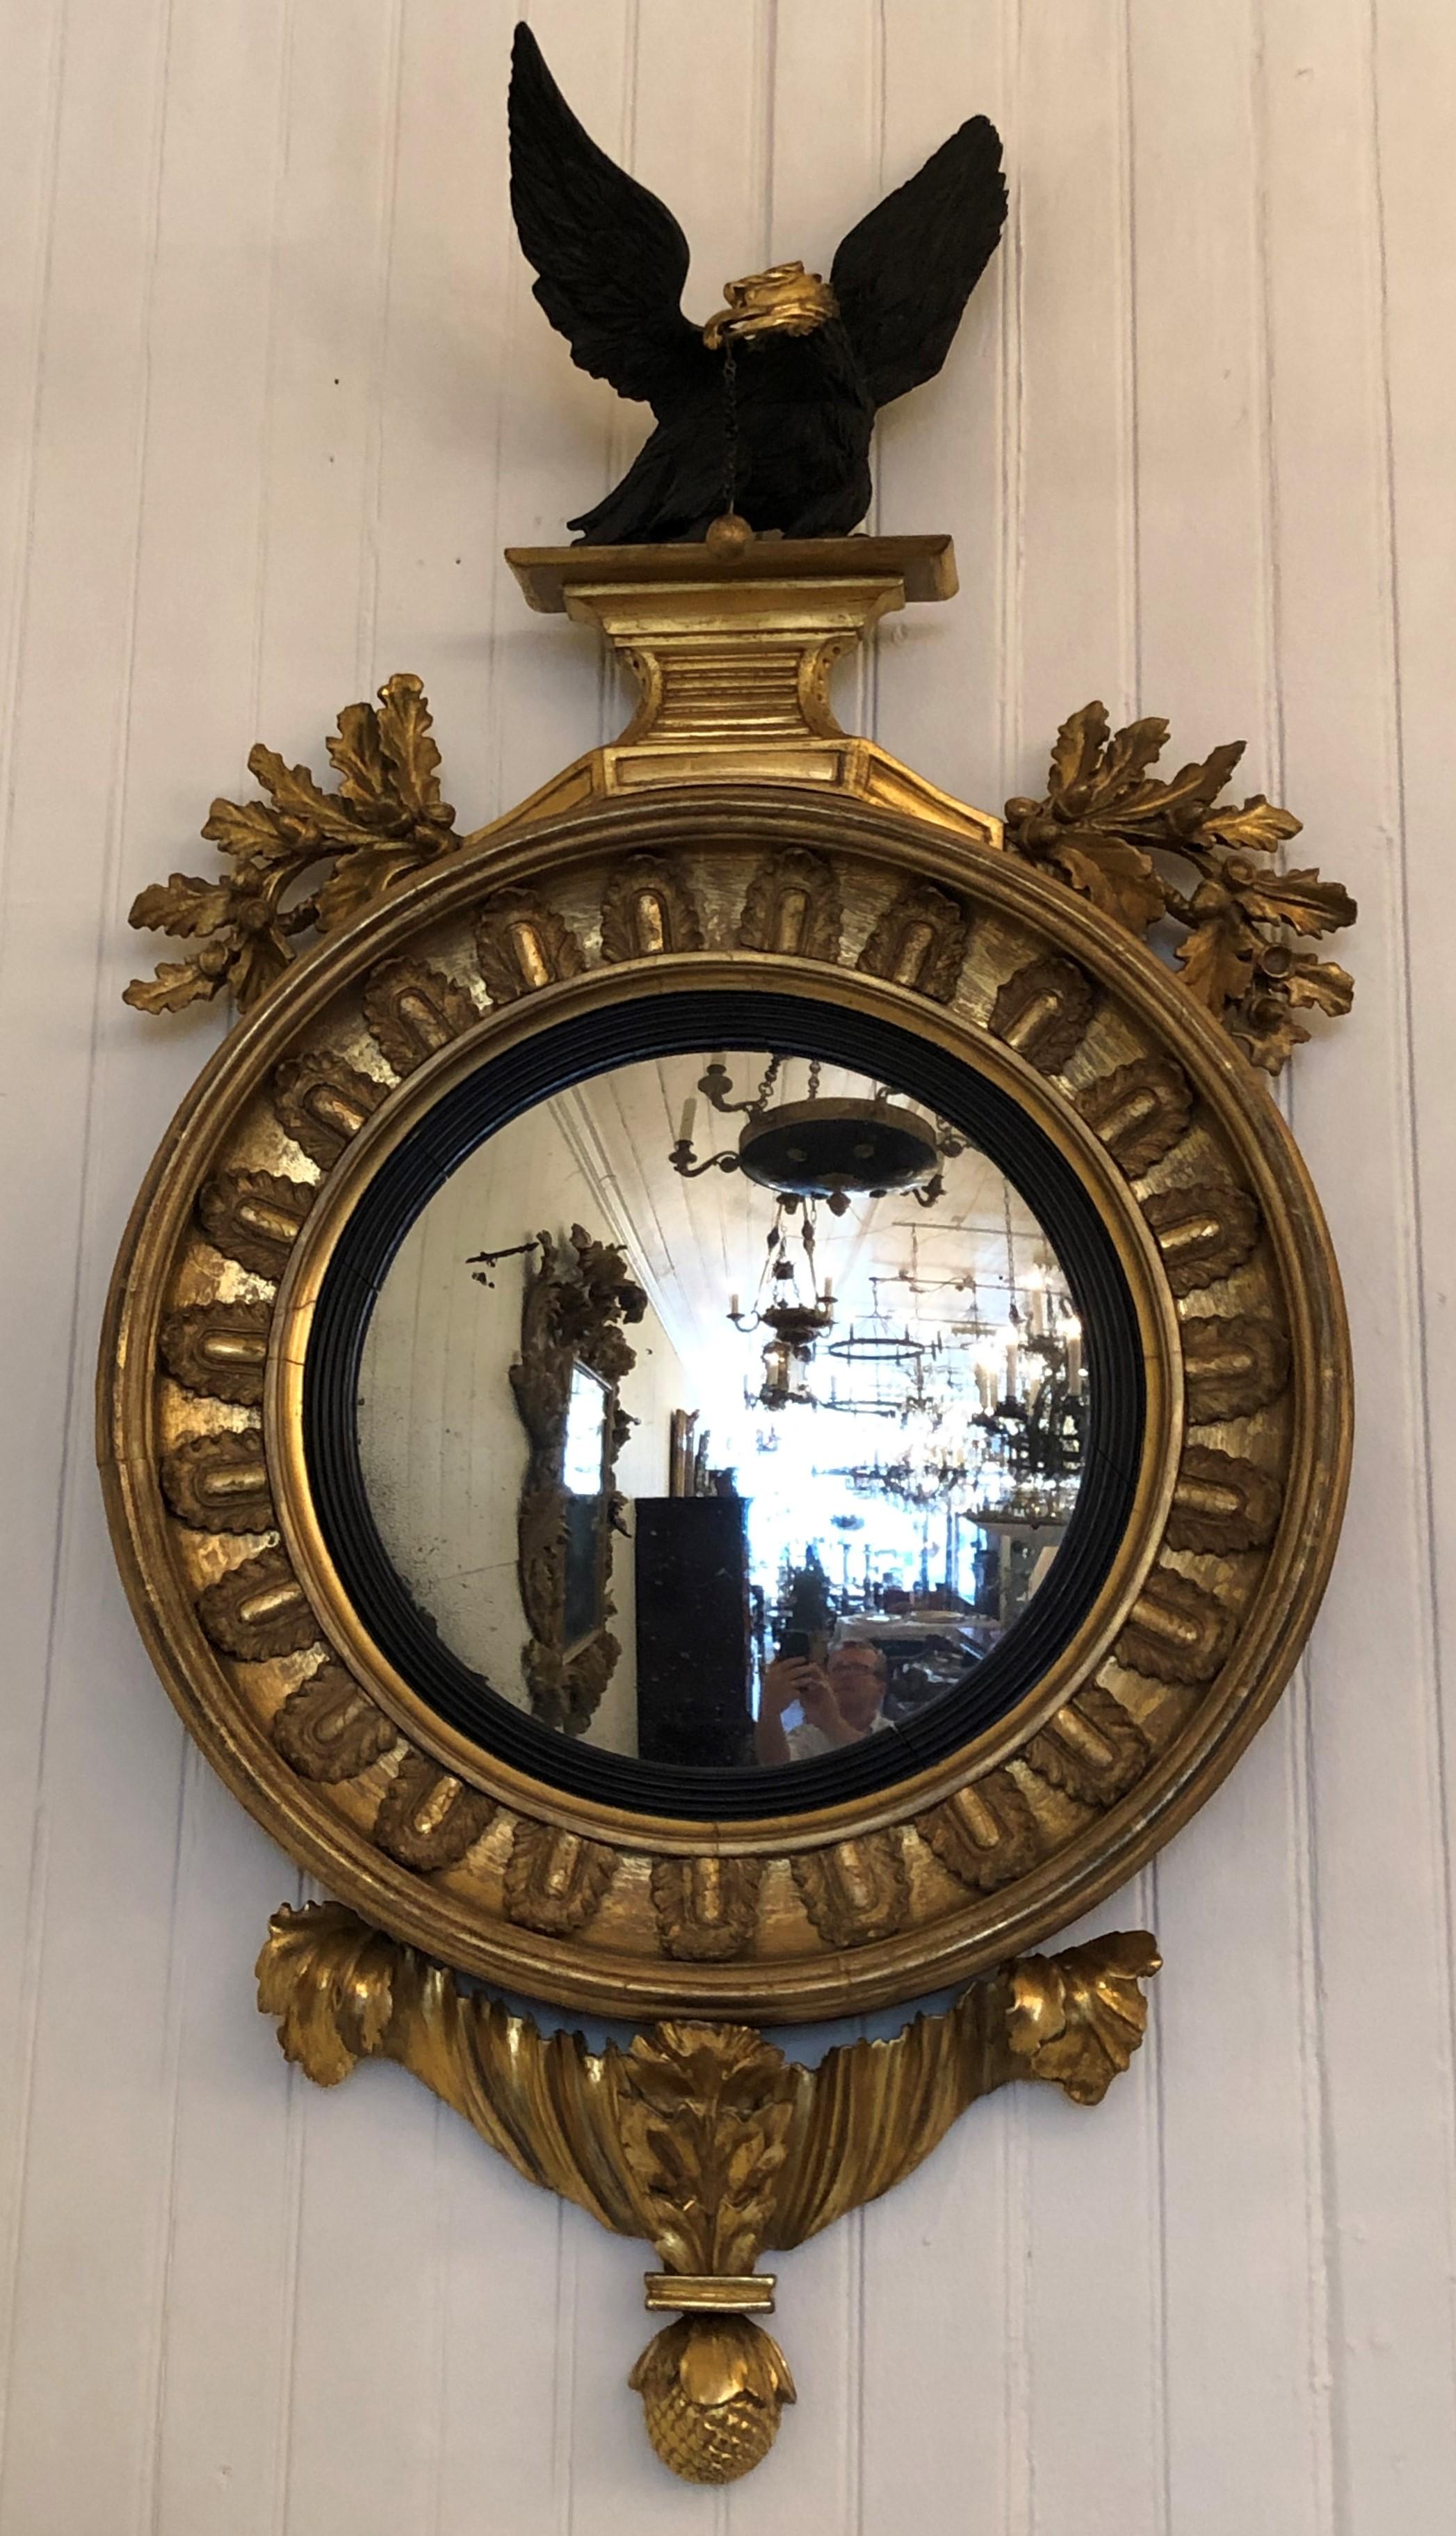 This convex mirror has a grand scale. The eagle has an ebonized body with a gilt head giving it a striking appearance which show off the feather details. The gilt head on the ebonized body ties in with the ebonized reeded ring making the mirror